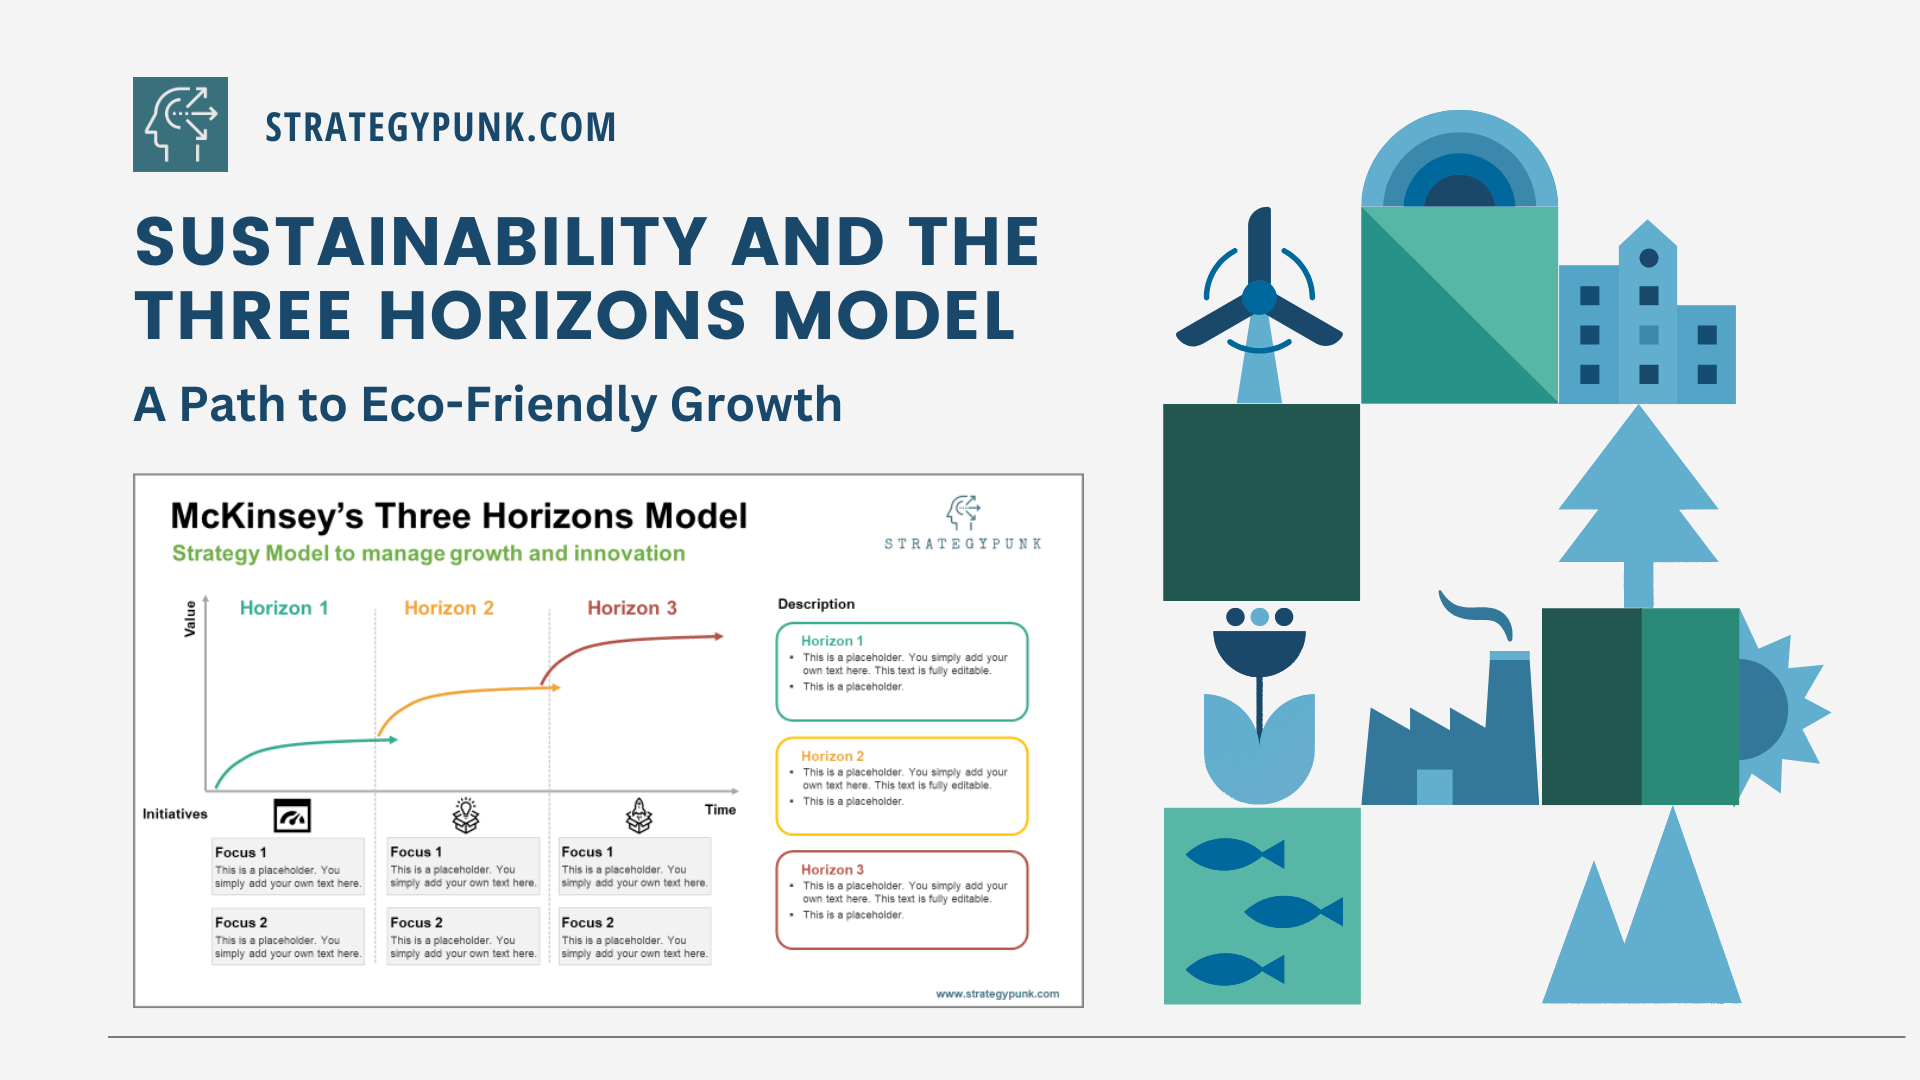 Sustainability and the Three Horizons Model: A Path to Eco-Friendly Growth